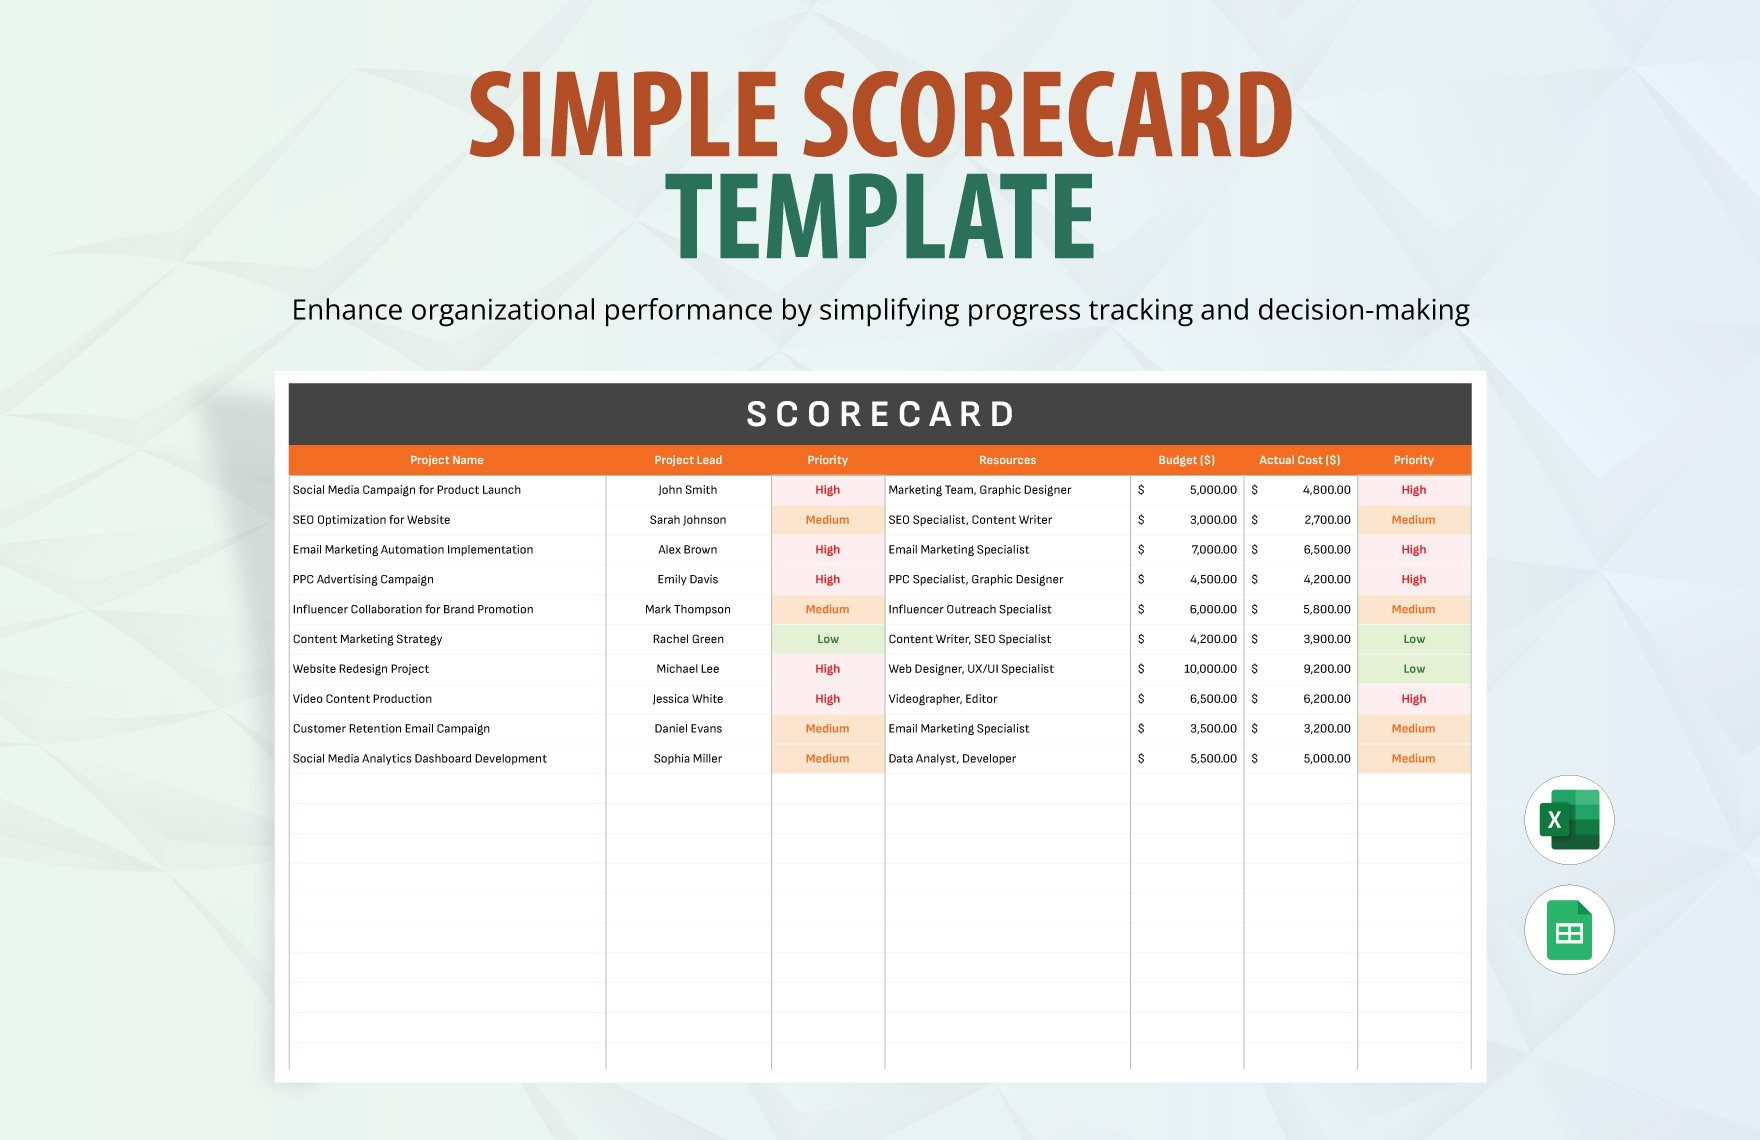 Simple Scorecard Template in Excel, Google Sheets